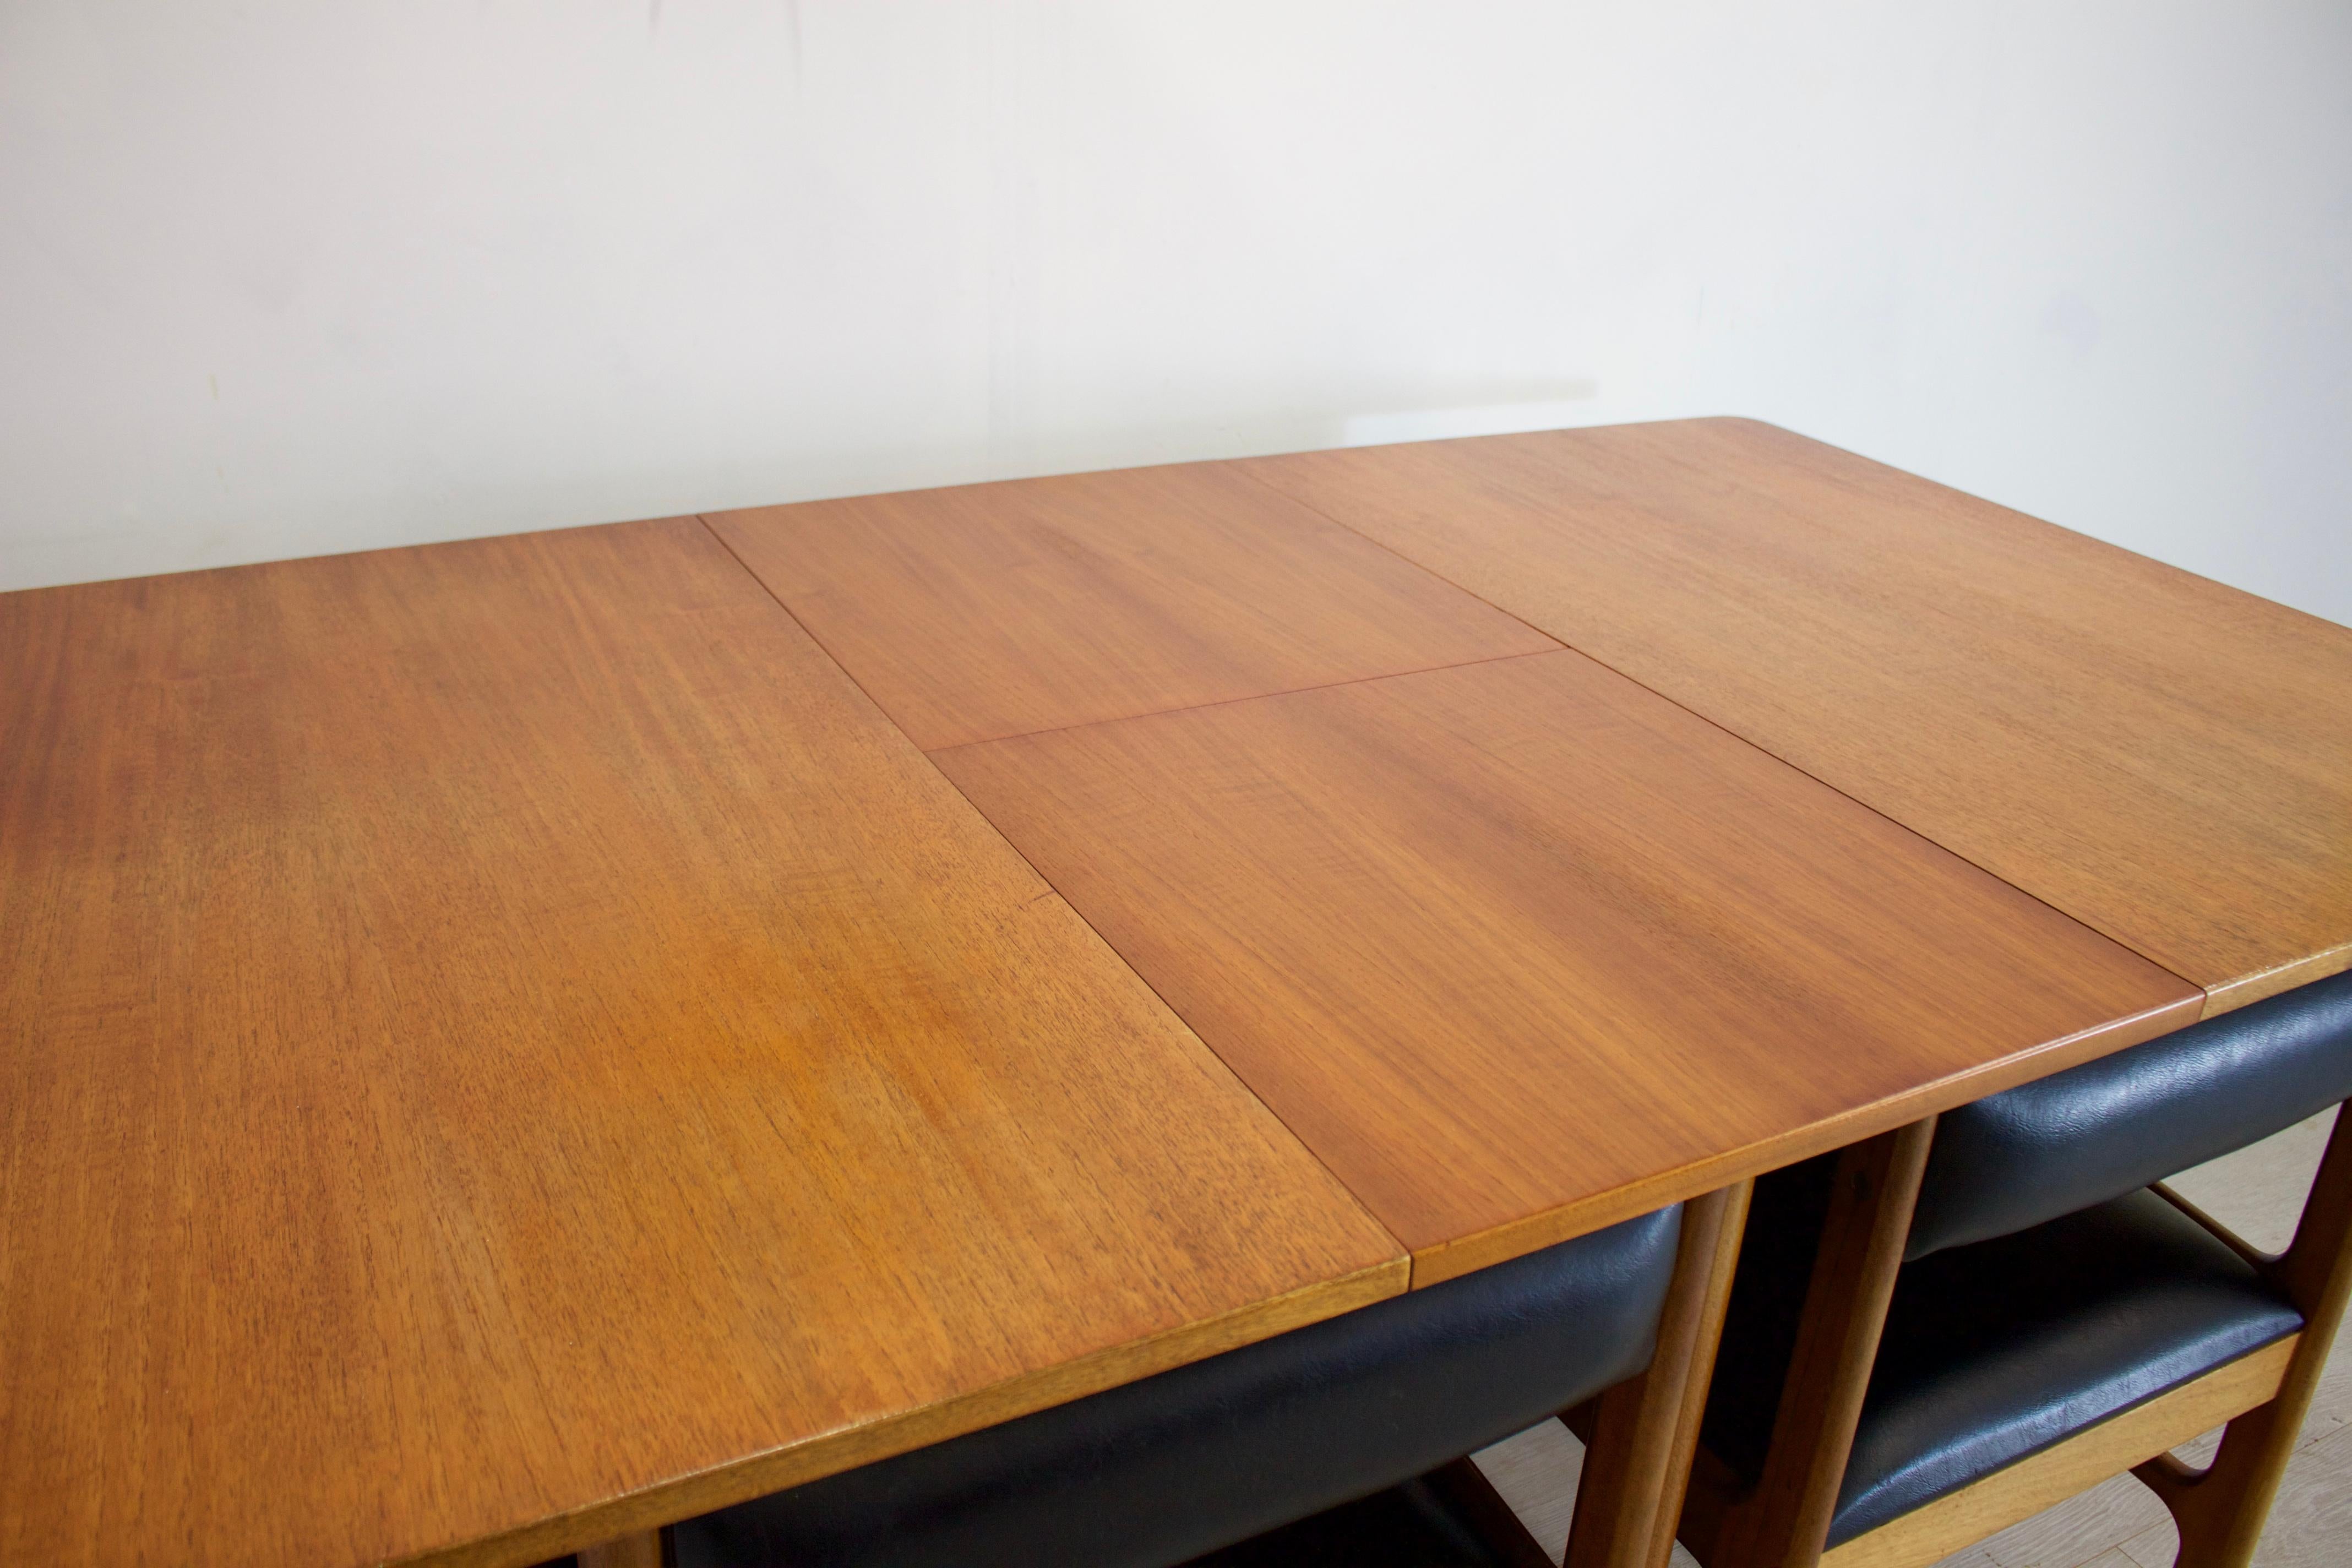 Veneer Midcentury Teak Extendable Dining Table with 4 Chairs from McIntosh, 1960s